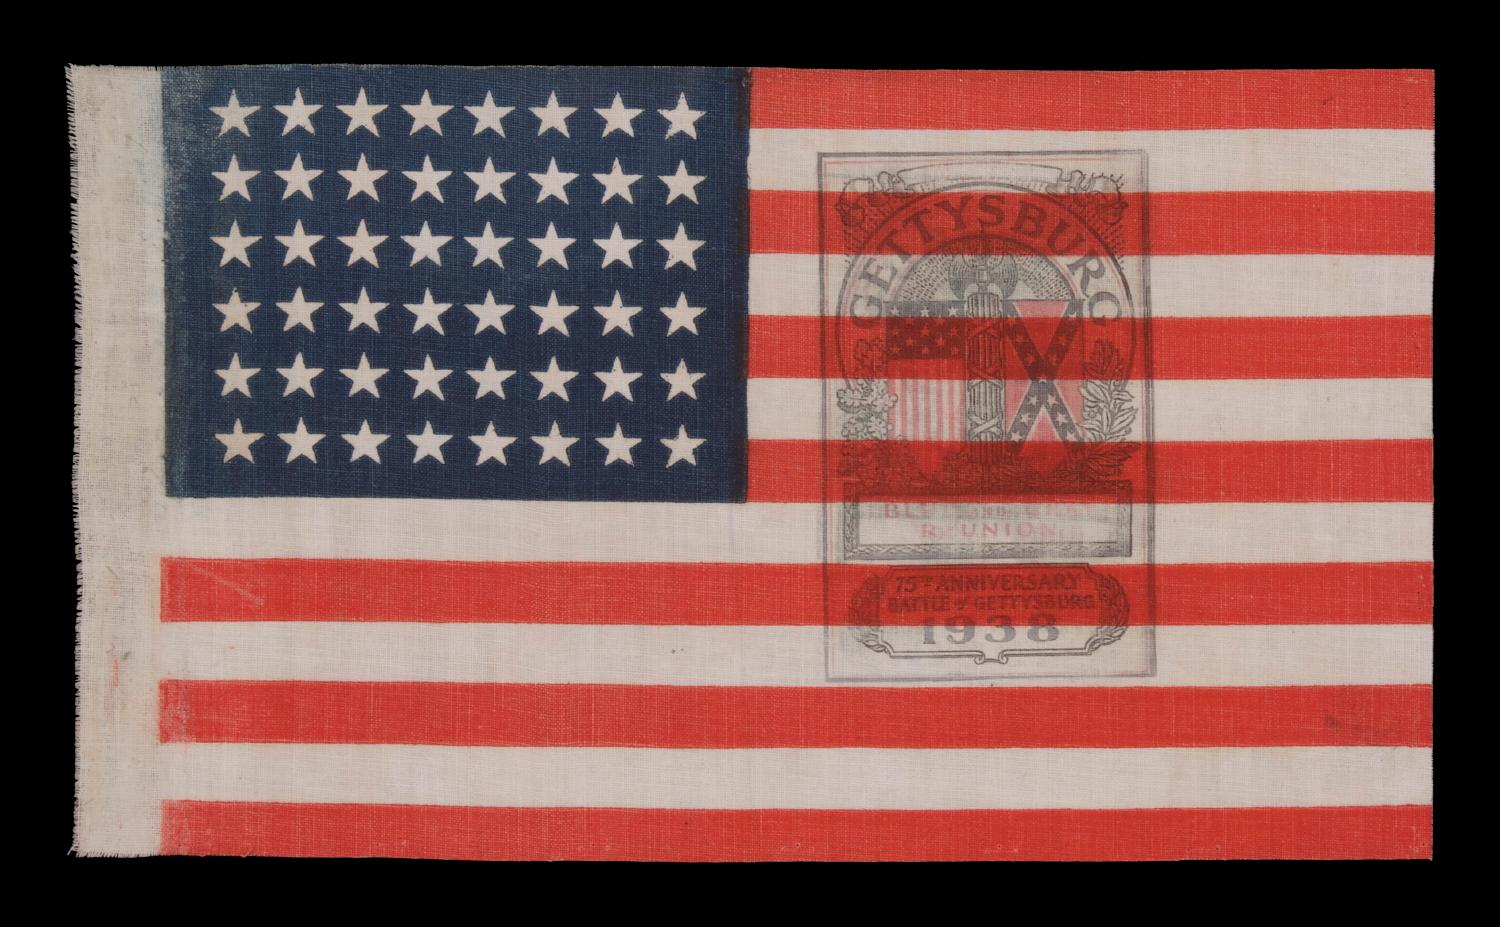 48 star American parade flag with a rare, two-color overprint, made to Commemorate the 75th anniversary of the Battle of Gettysburg 

48 Star American Parade flag, printed on an oilcloth-type cotton. This flag bears a very rare and unusual